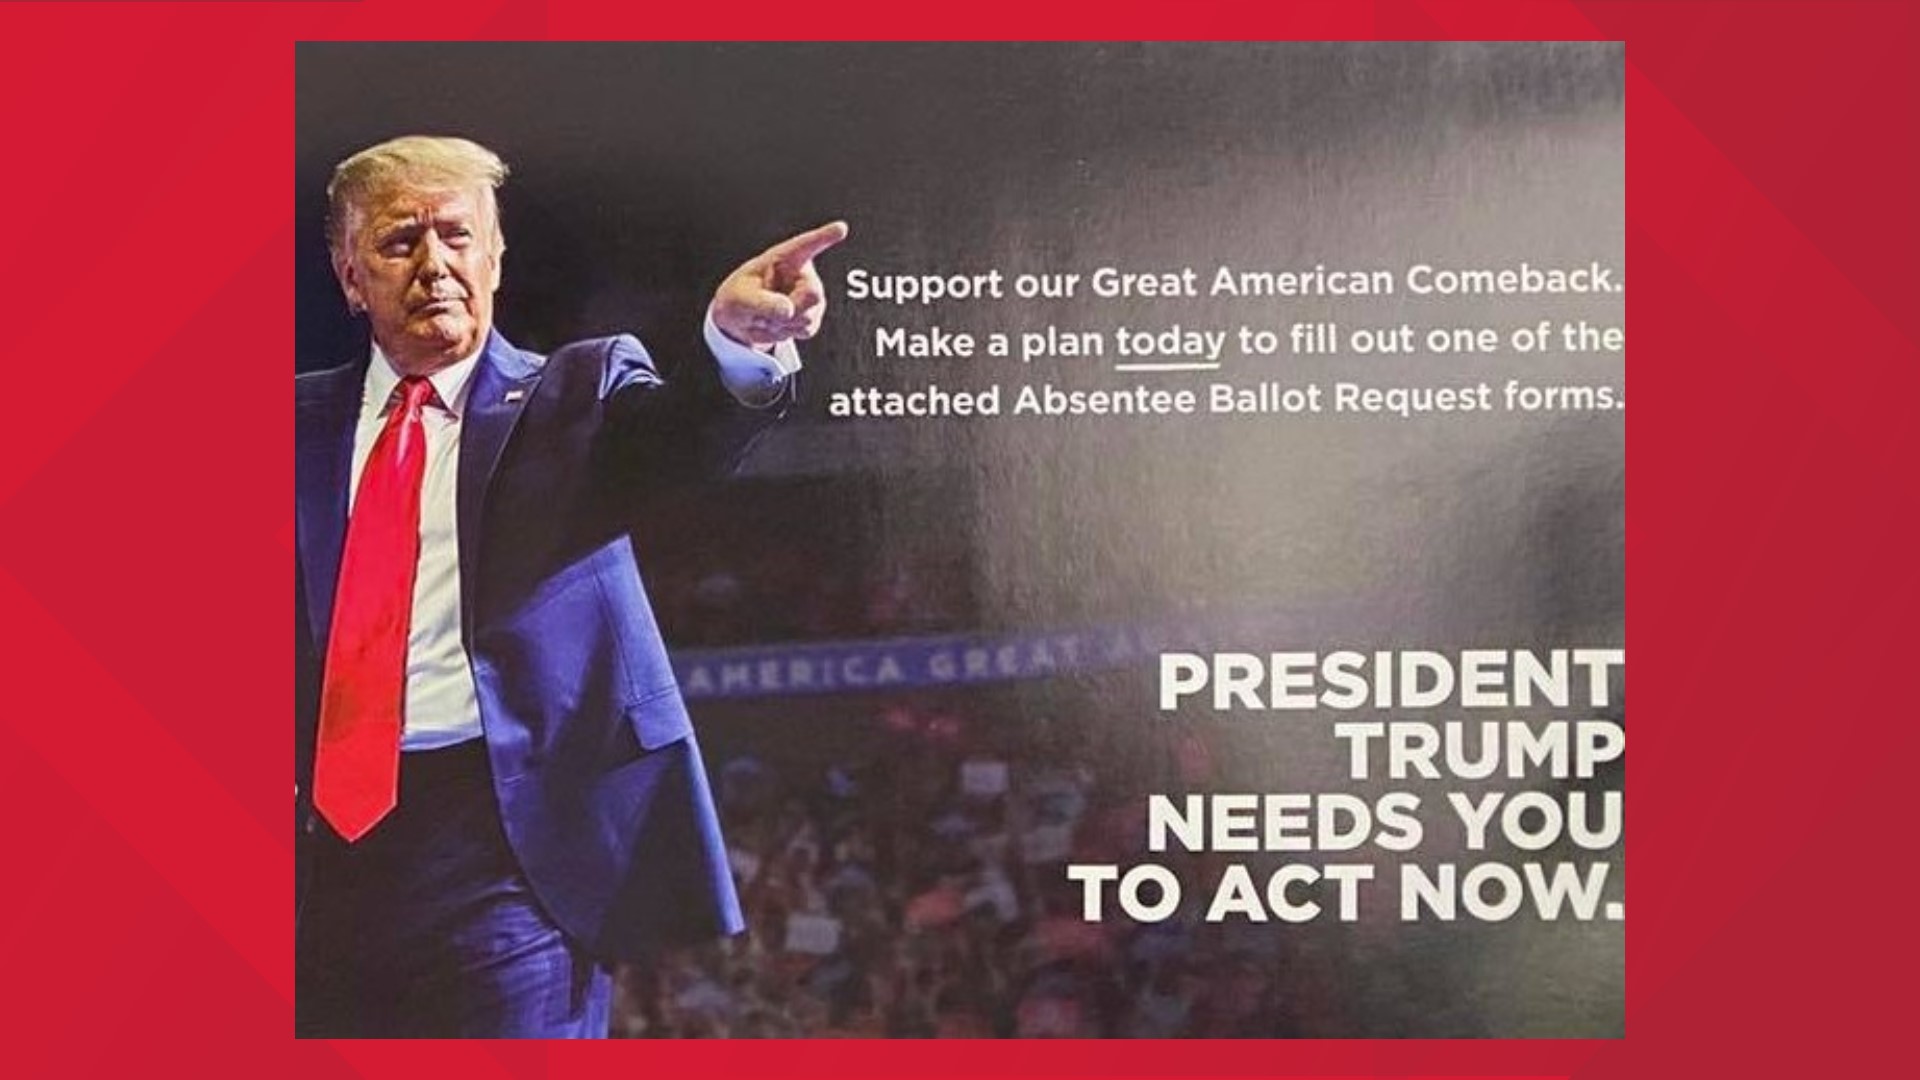 The campaign fliers feature pictures of and quotes from President Trump on the outside and an application for an absentee ballot on the inside.